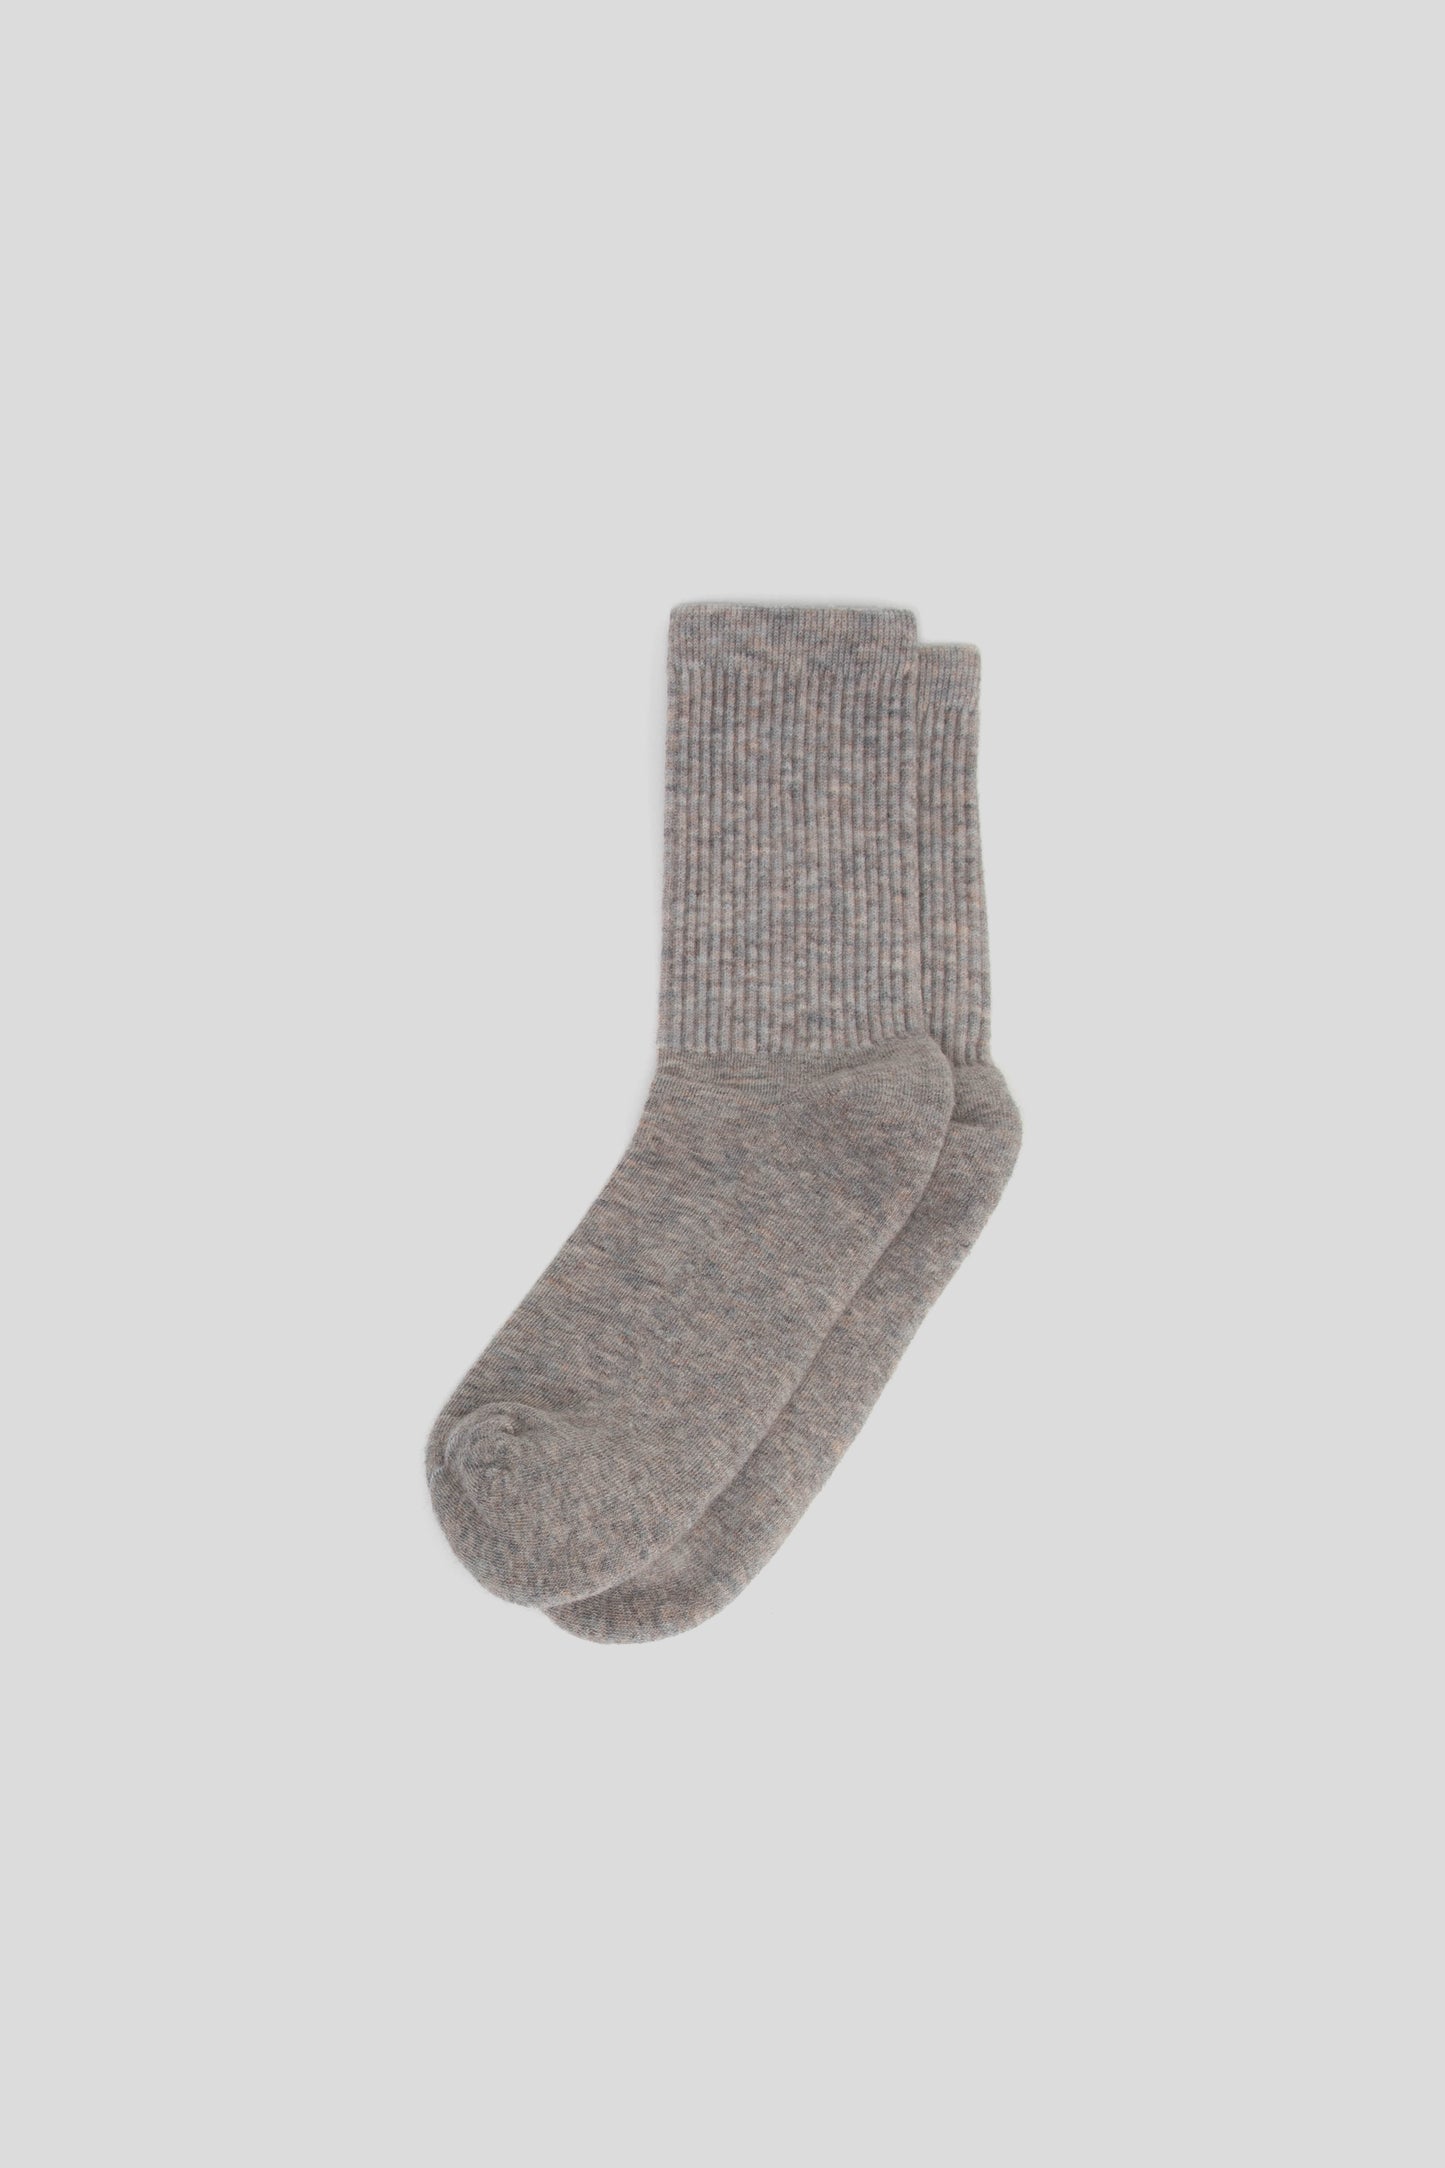 American Trench Supermerino Crew Sock in Taupe Heather